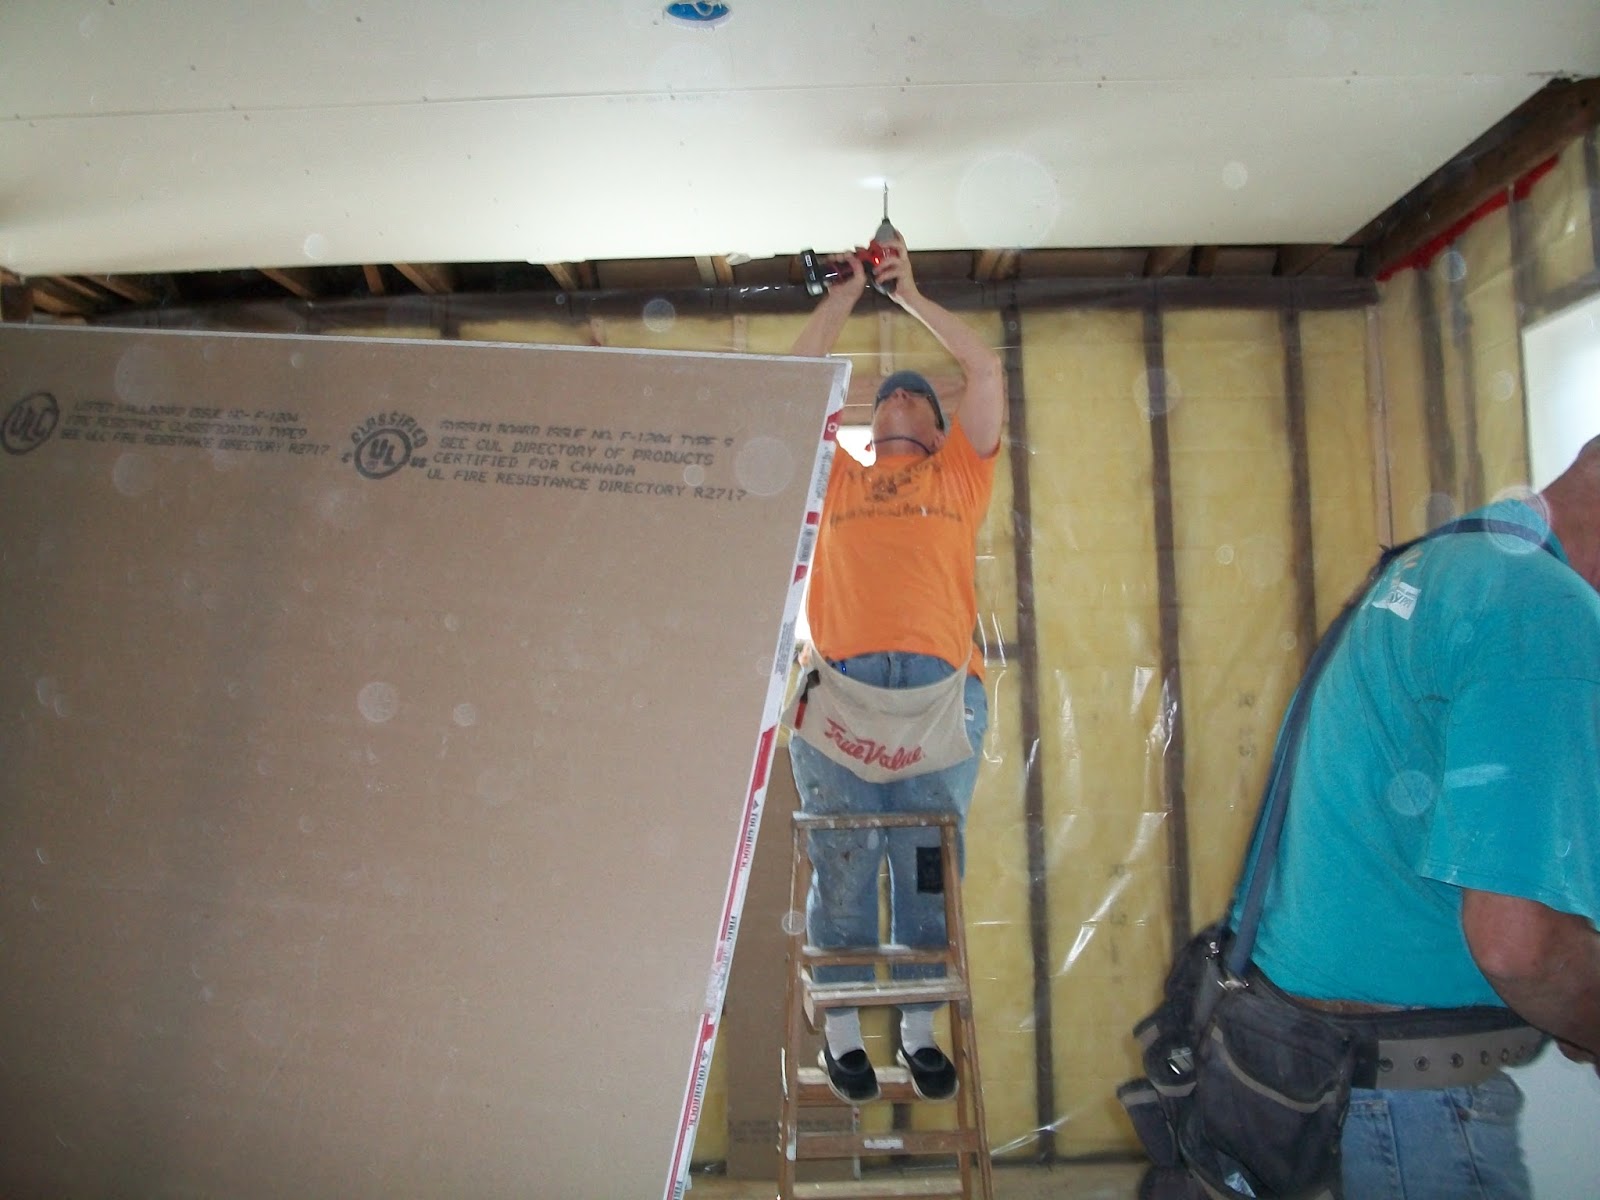 Here, There, and Just About Anywhere: Putting up drywall